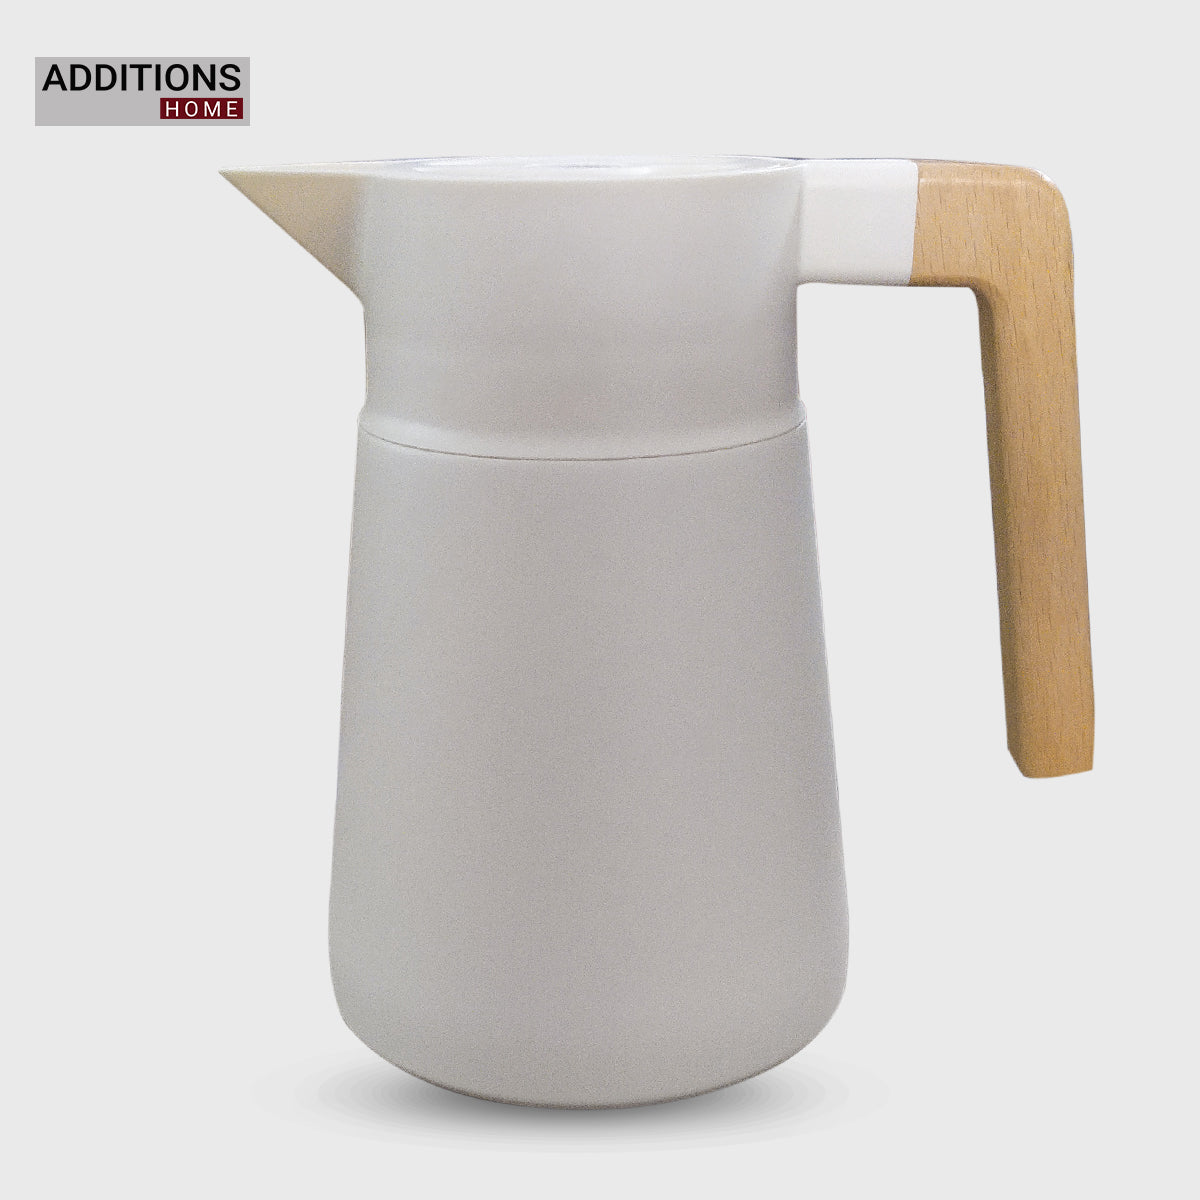 Stainless Steel Vacuum Jug with Wooden Handle - 1.5 Ltr.